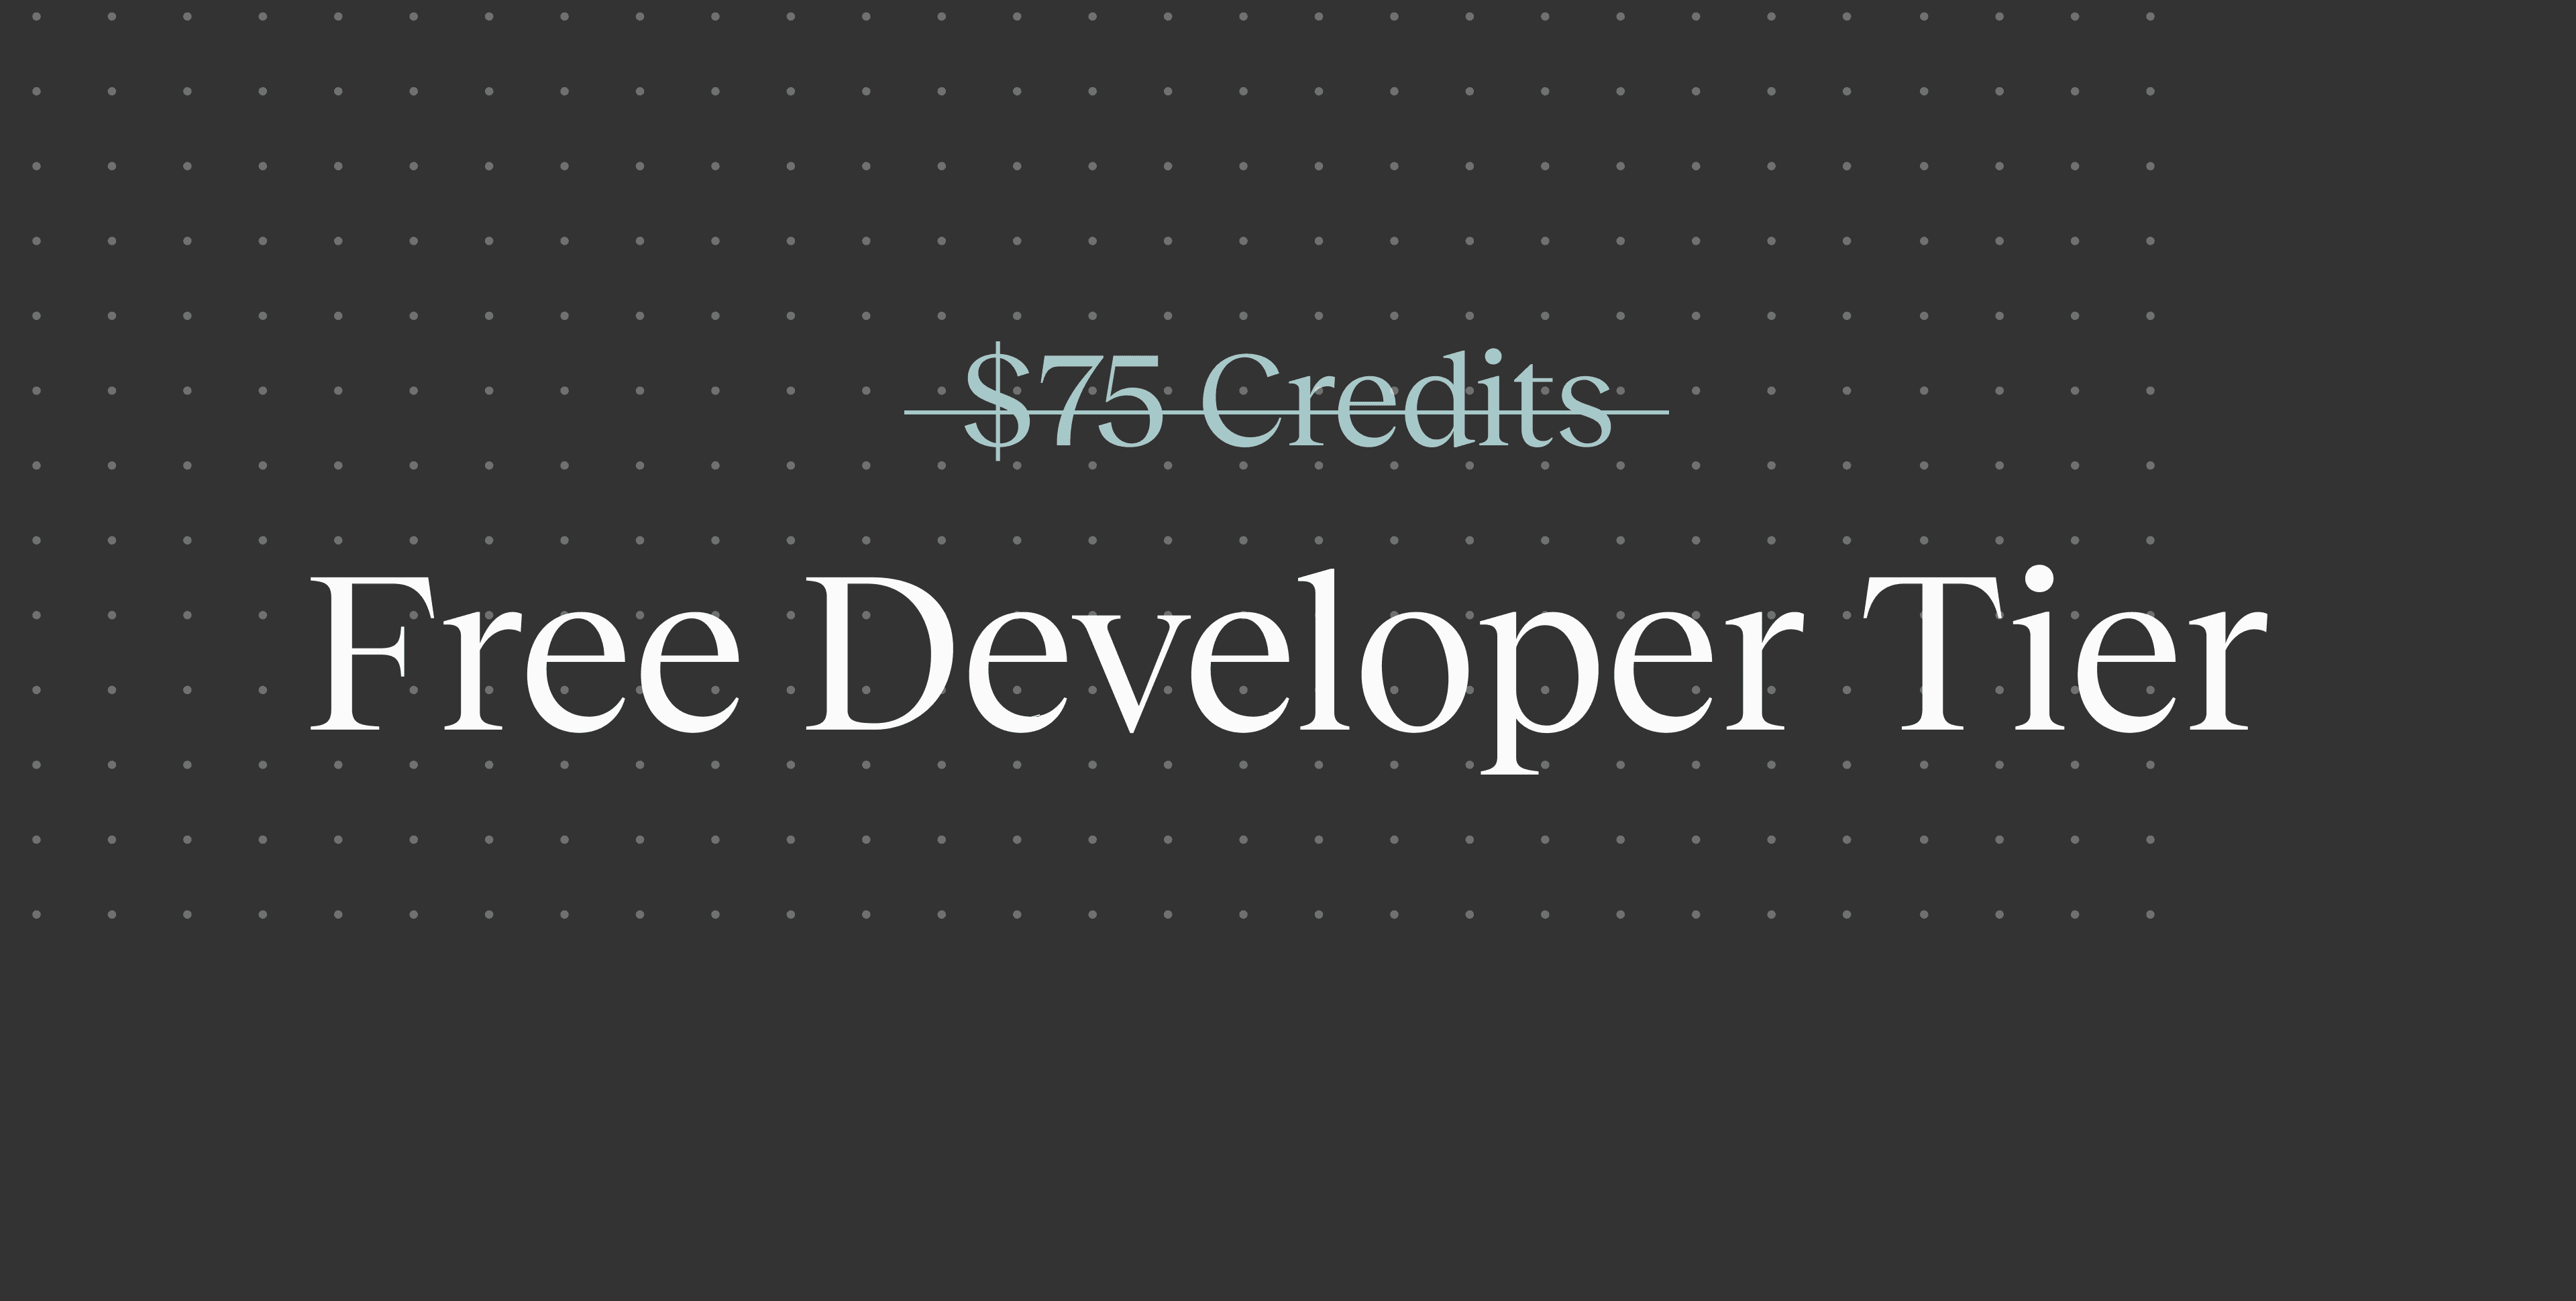 Introducing a Free Developer Tier + Simplified Pricing